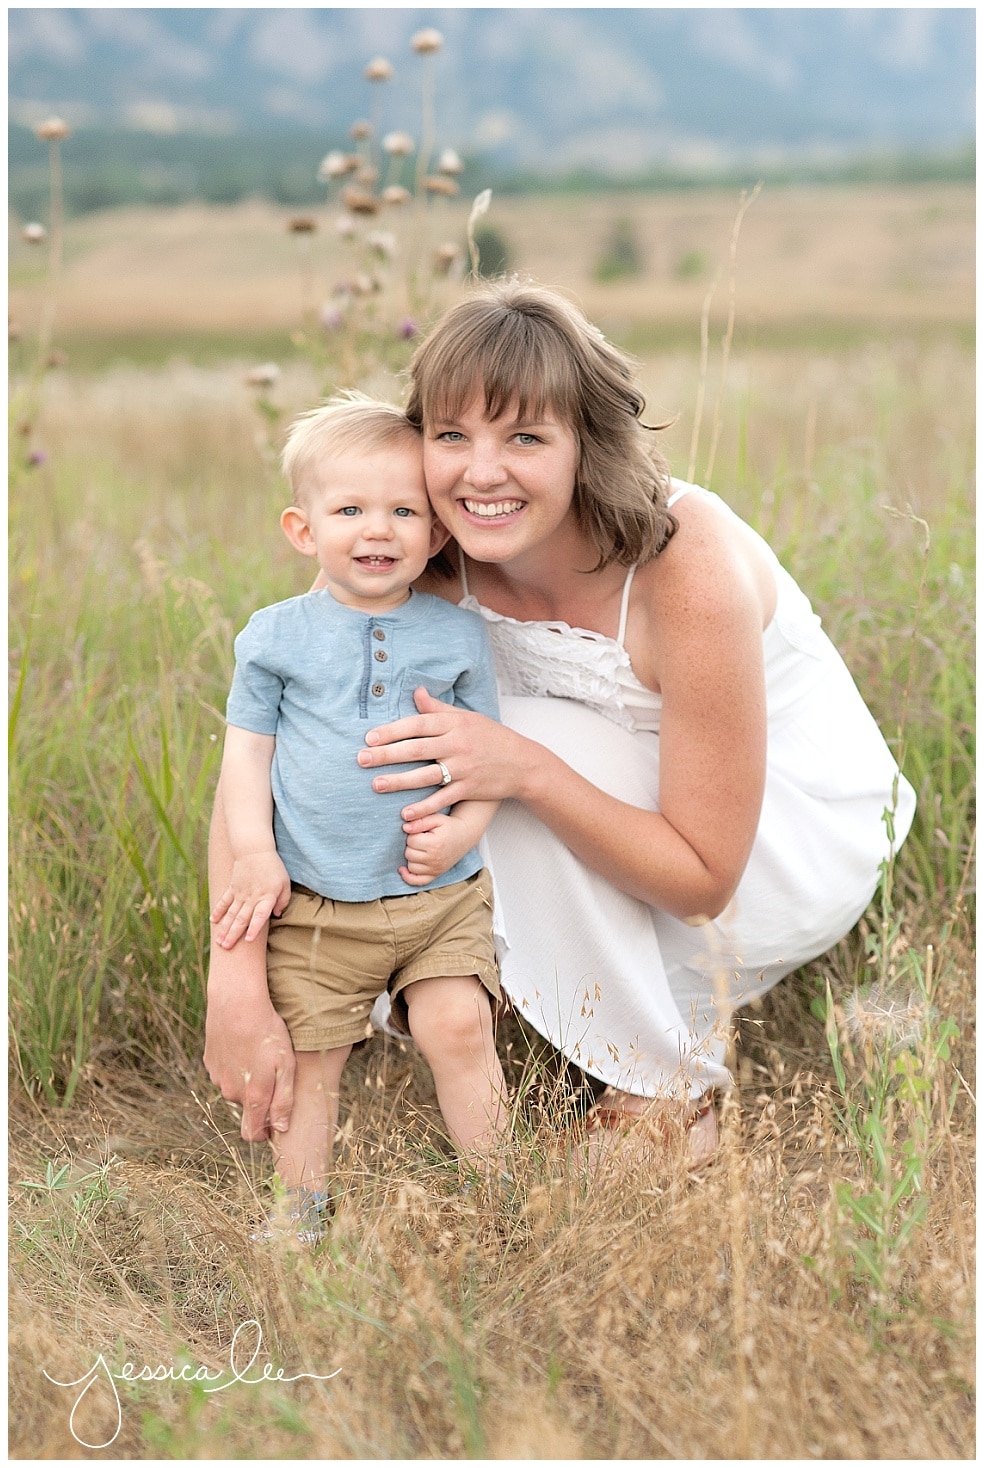 Lafayette Colorado Family Photographer, Jessica Lee Photography, mother with son